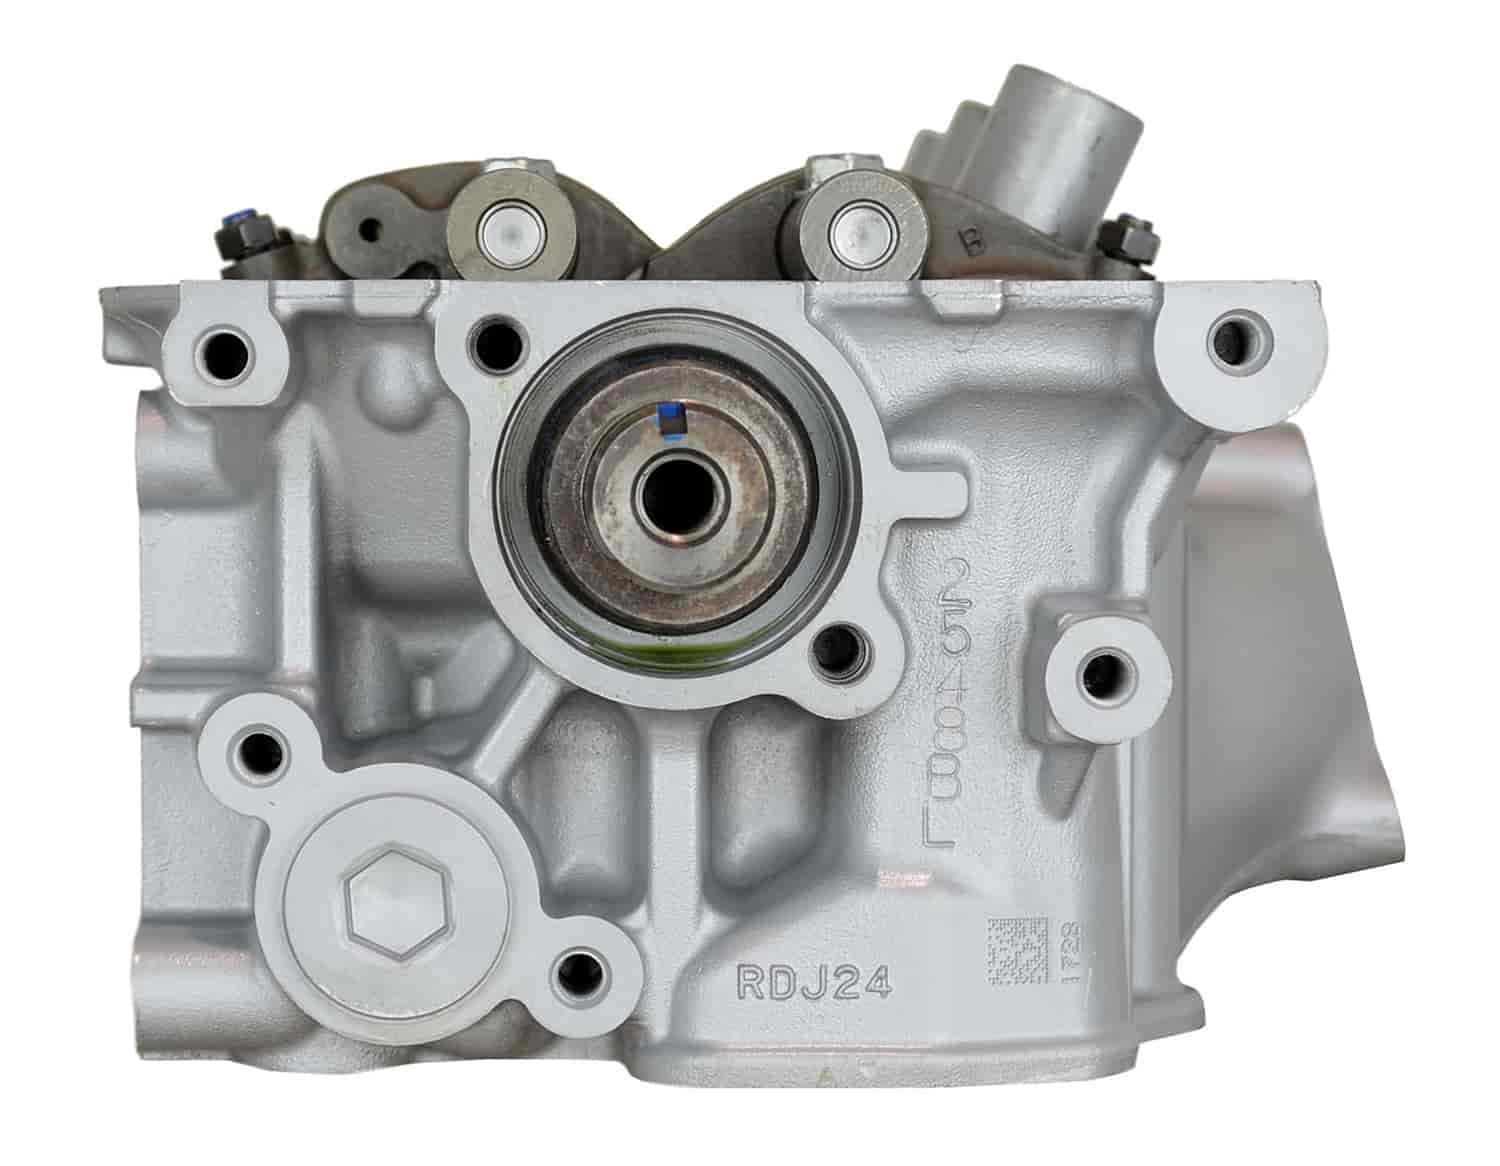 Remanufactured Cylinder Head for 2003-2010 Acura/Honda with 3.2/3.5L V6 J32A3/J35A